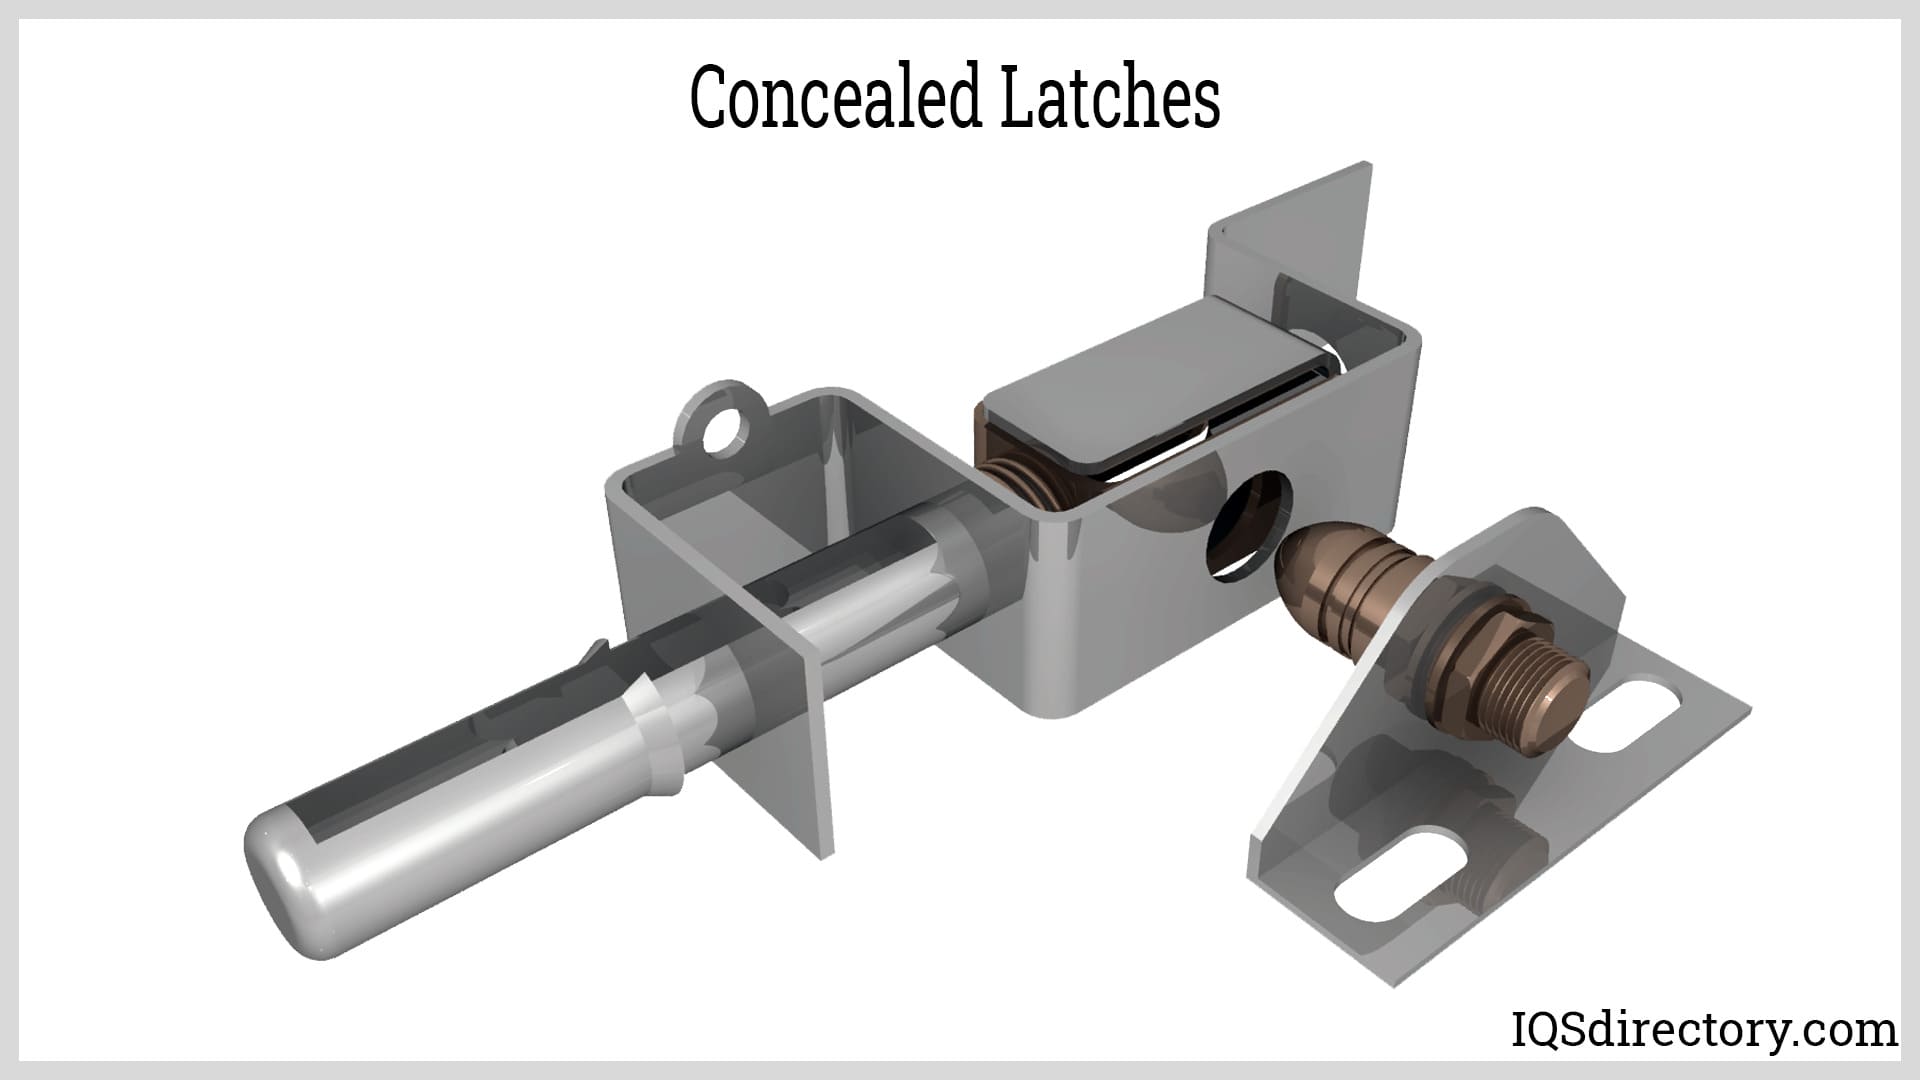 Concealed Latches